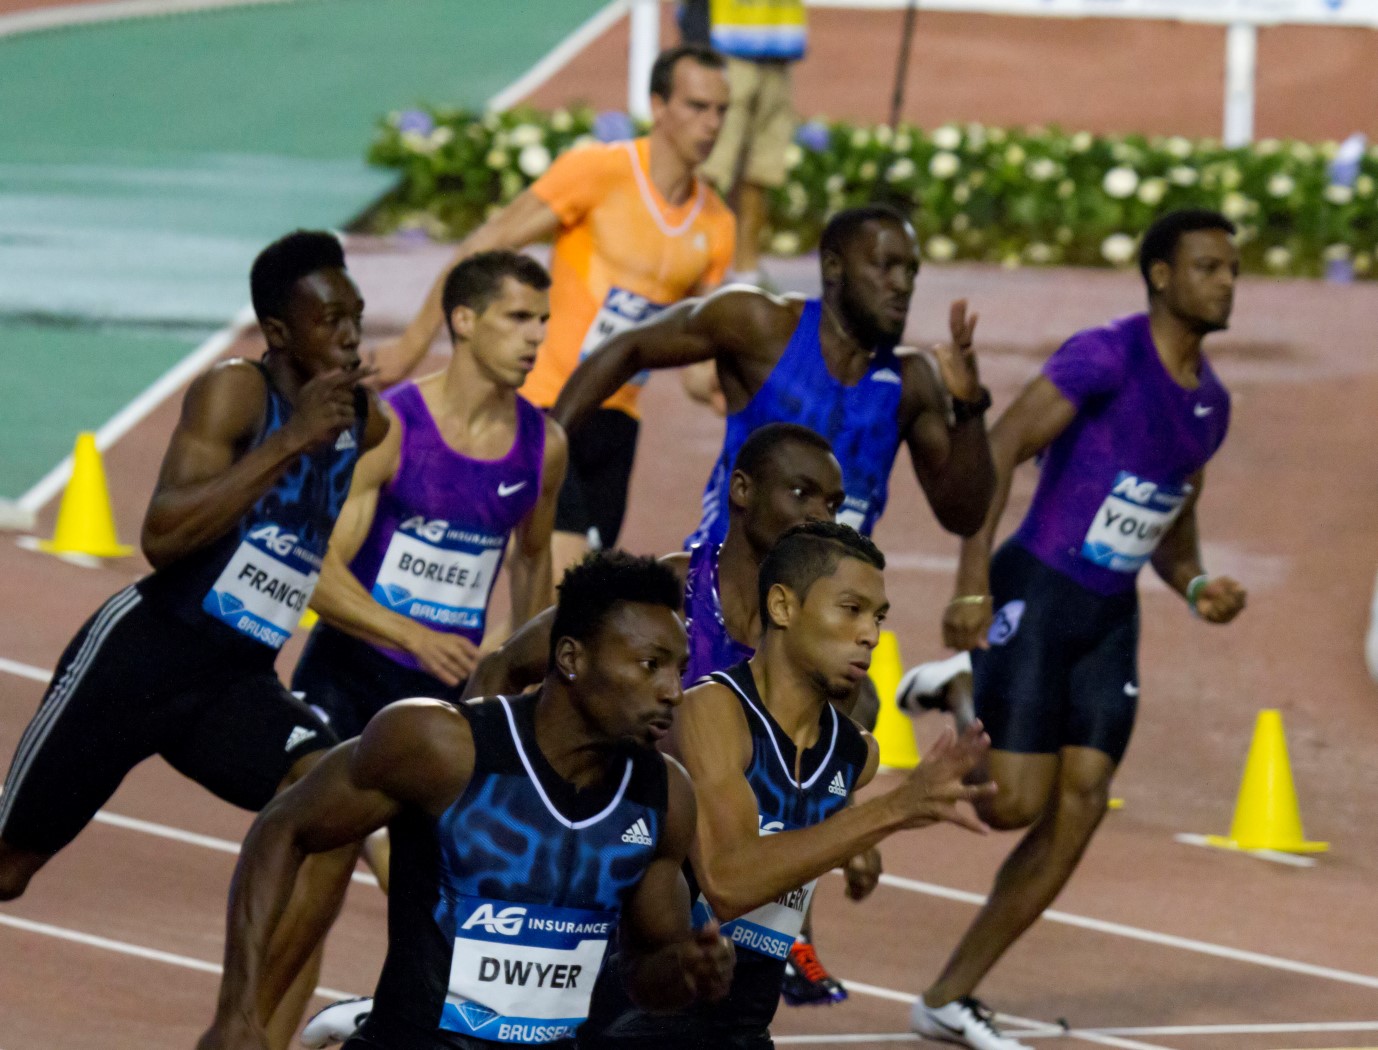 a group of men racing down a track in race uniforms